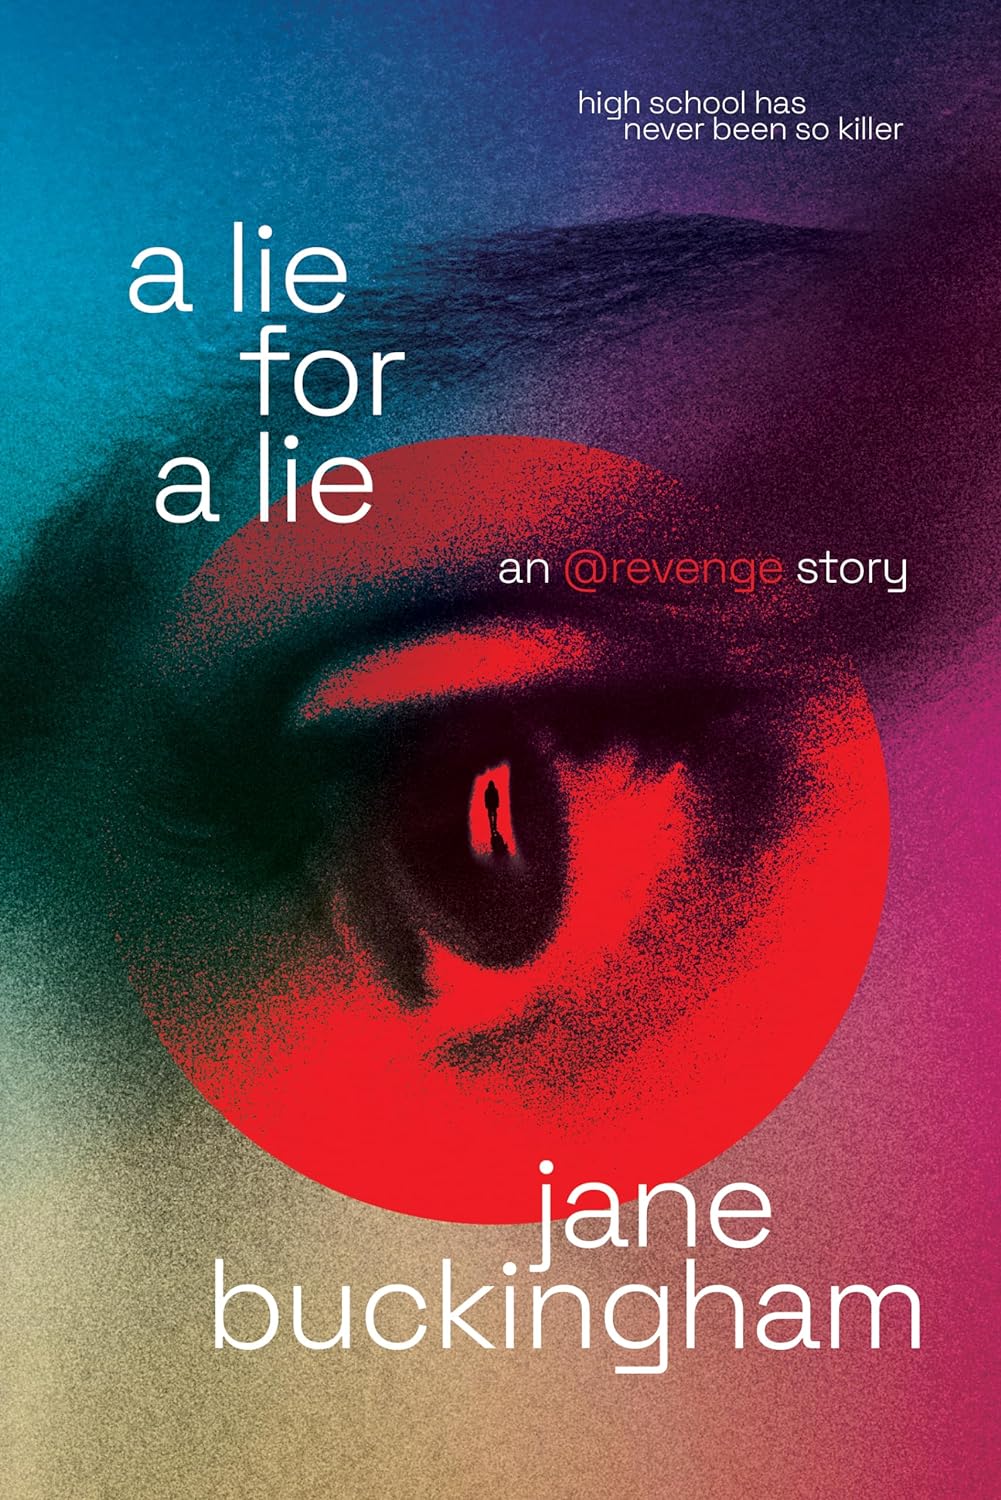 Spotlight on  A Lie For a Lie (Jane Buckingham), Excerpt & Giveaway ~ US/CAN Only!